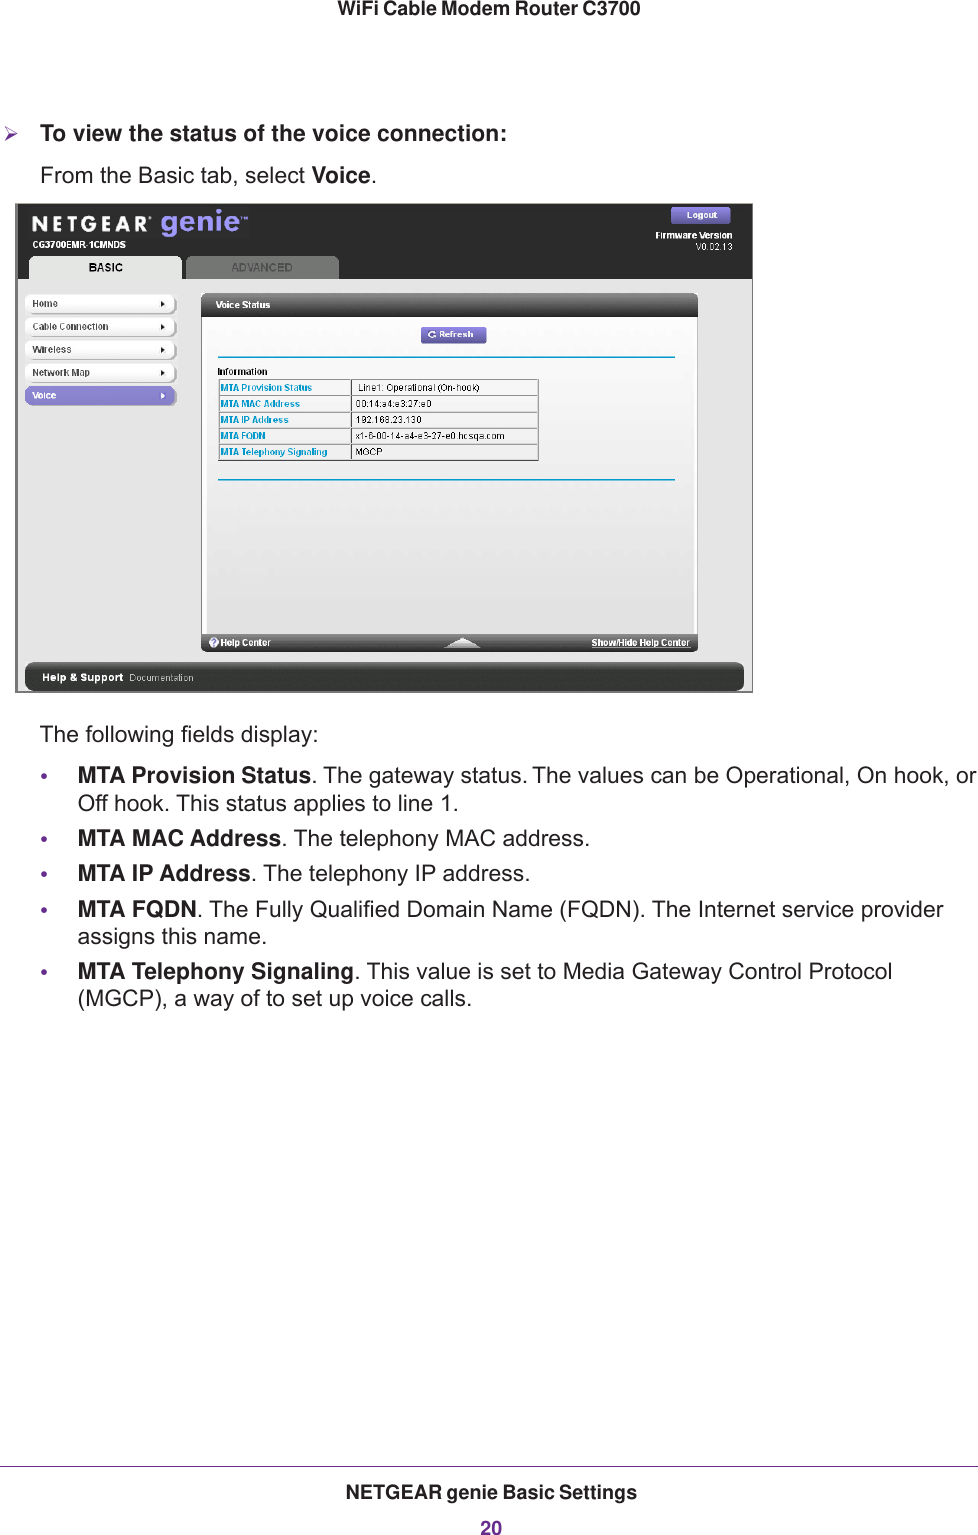 NETGEAR genie Basic Settings20WiFi Cable Modem Router C3700 To view the status of the voice connection:From the Basic tab, select Voice.The following fields display:•MTA Provision Status. The gateway status. The values can be Operational, On hook, or Off hook. This status applies to line 1.•MTA MAC Address. The telephony MAC address.•MTA IP Address. The telephony IP address.•MTA FQDN. The Fully Qualified Domain Name (FQDN). The Internet service provider assigns this name.•MTA Telephony Signaling. This value is set to Media Gateway Control Protocol (MGCP), a way of to set up voice calls.